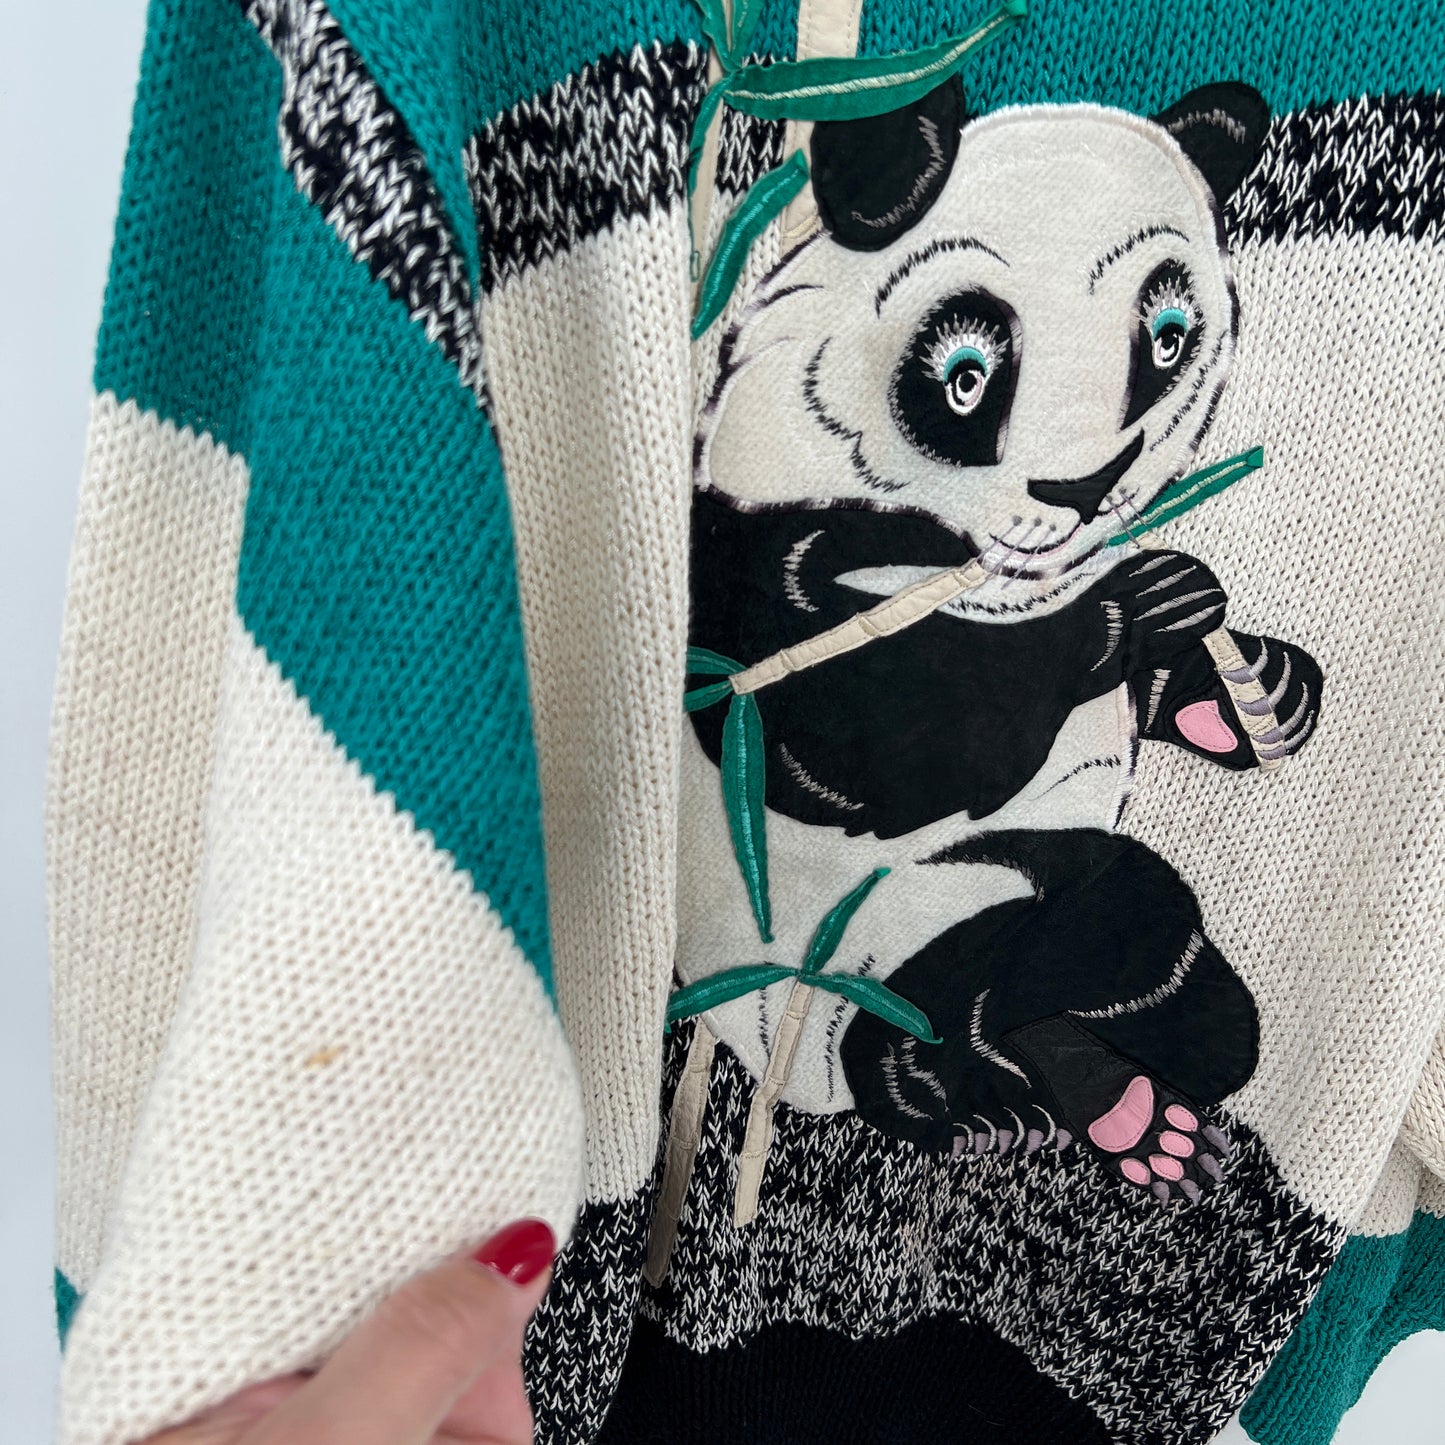 SOLD. Vintage Nannell Panda Oversized Sweater